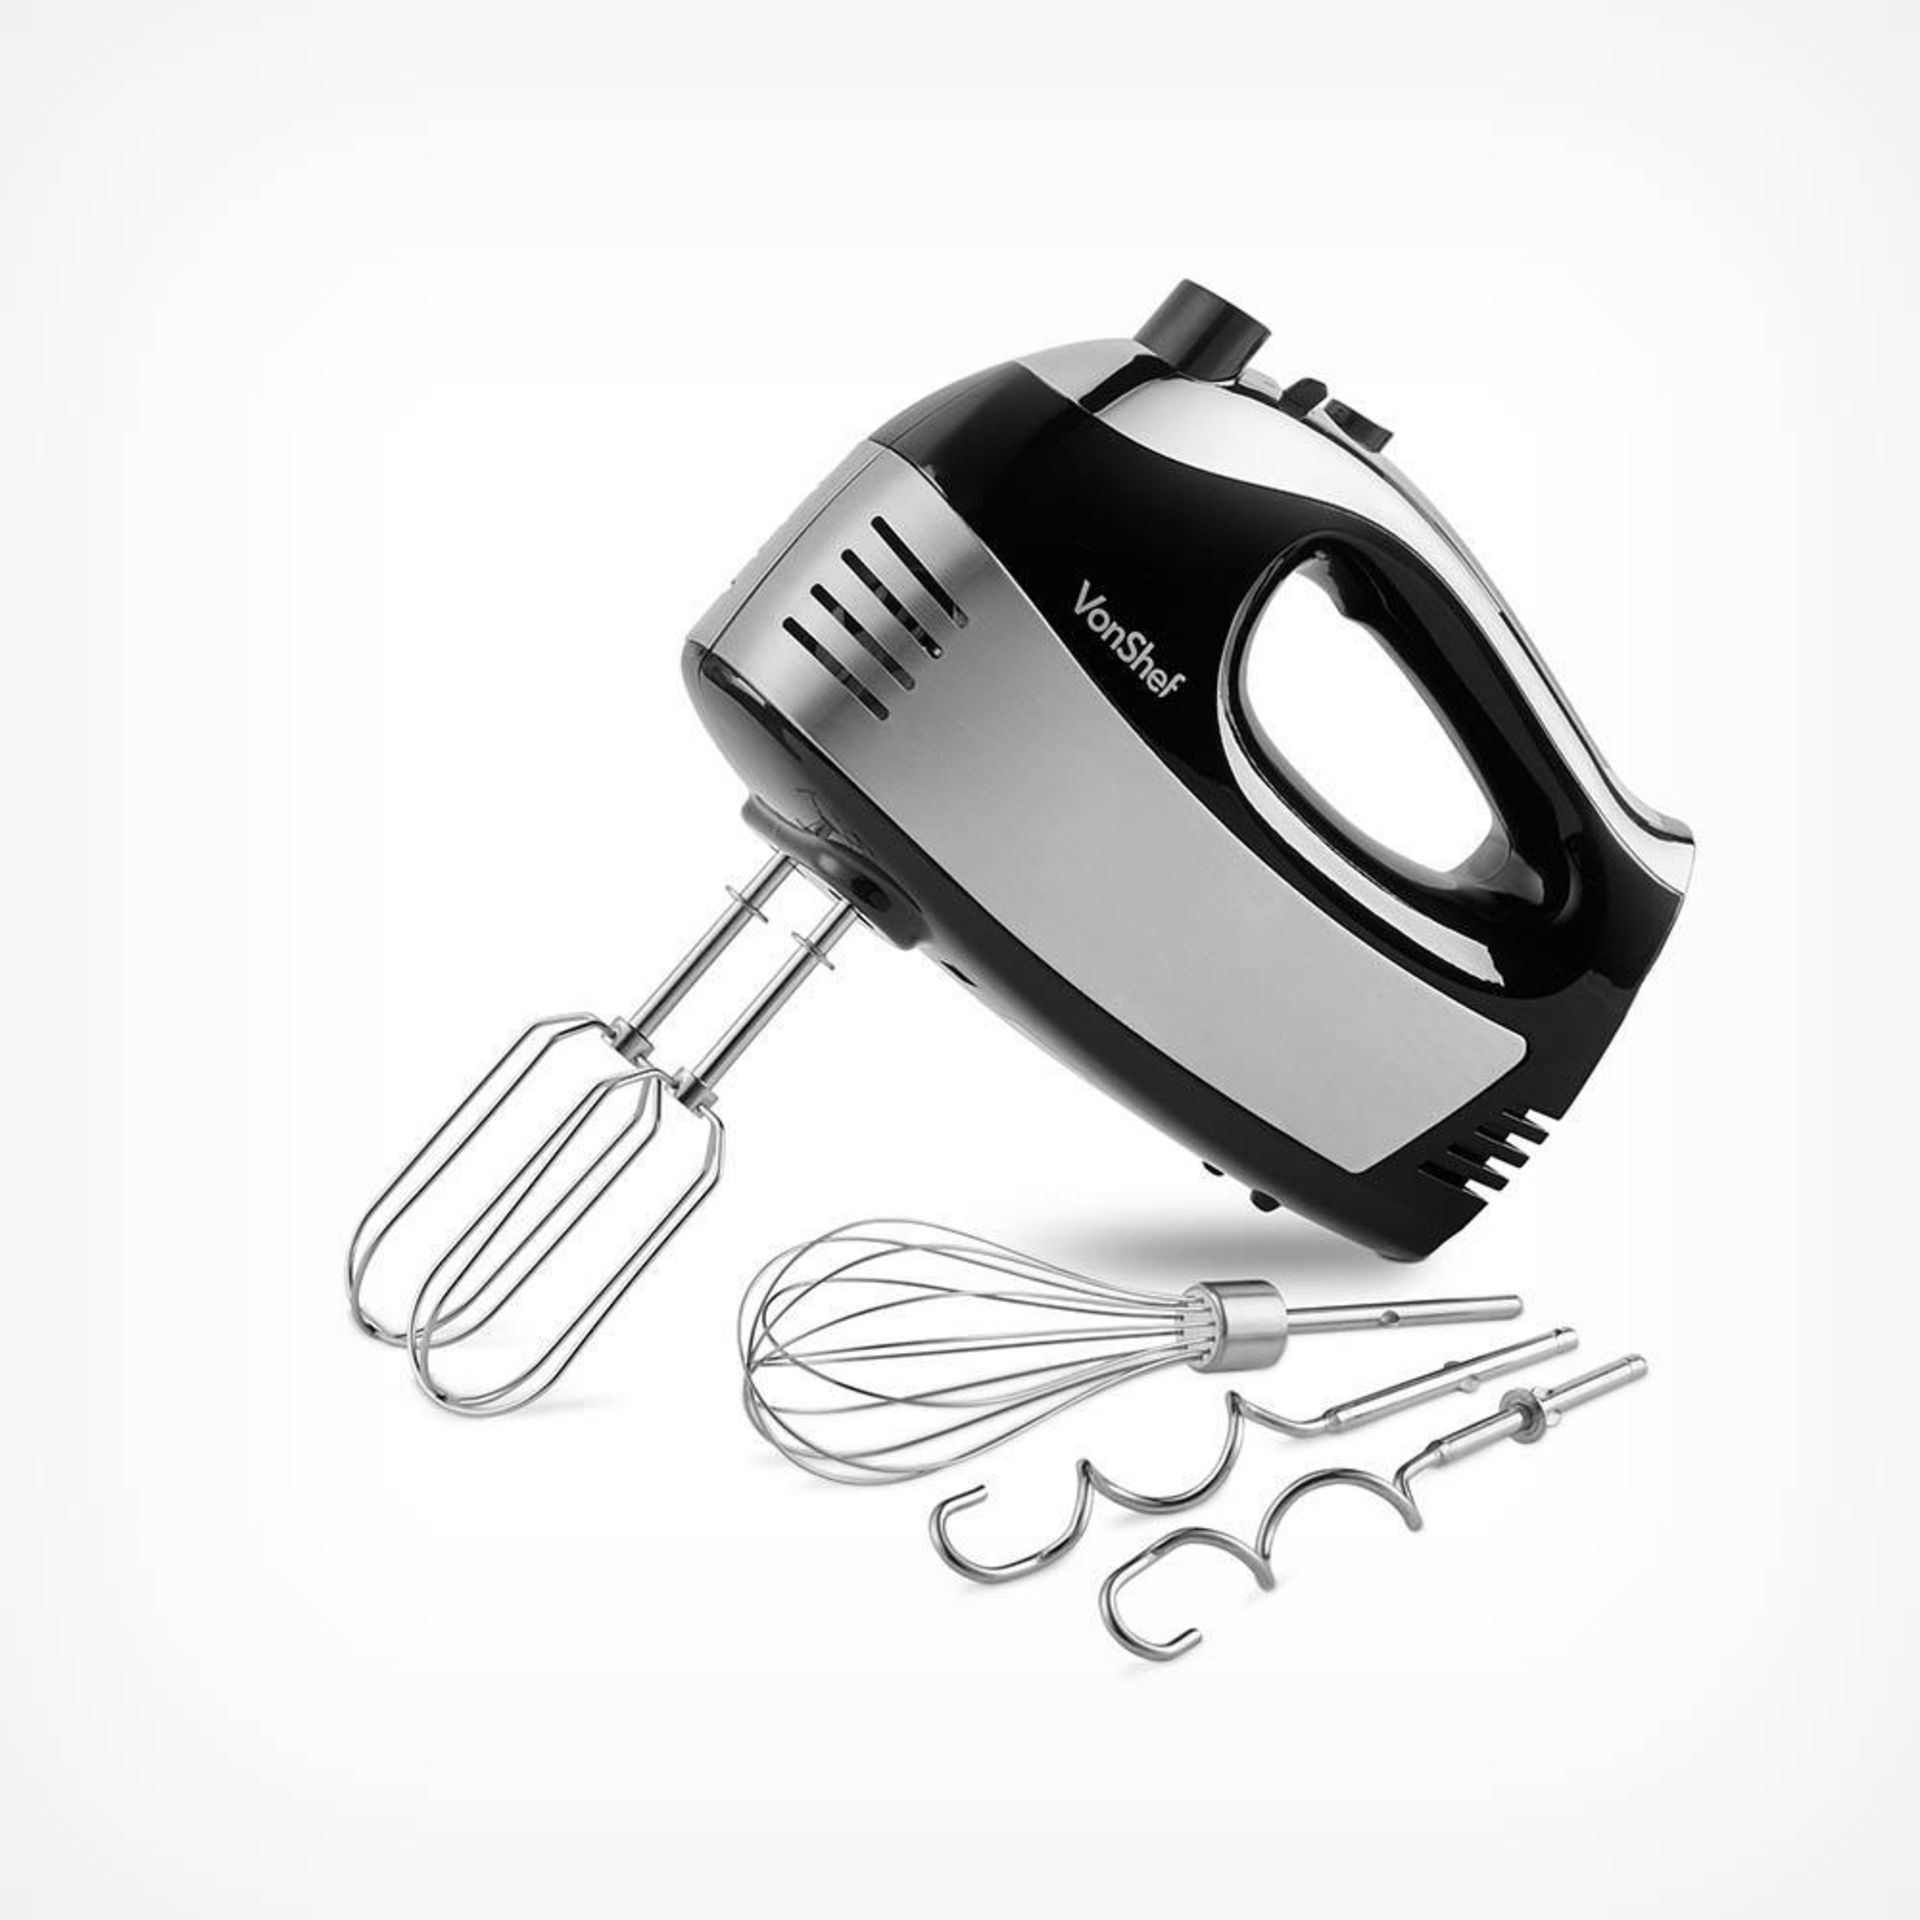 400W Black Hand Mixer - PW. 400W Black Hand MixerThis is the ultimate kitchen appliance if you